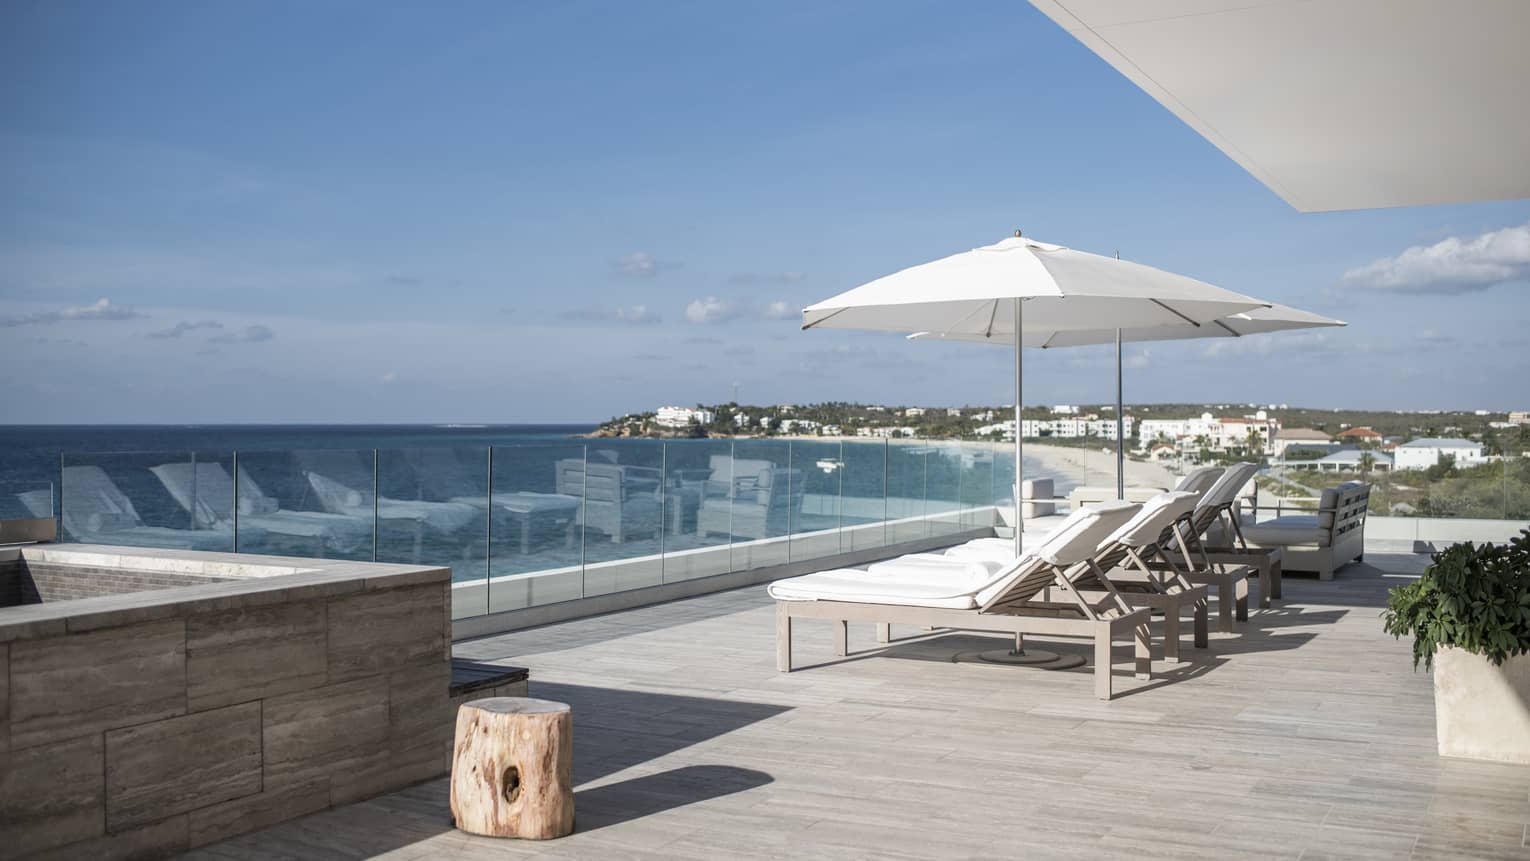 Private sea-view terrace with grey slate floors, four sun loungers and two umbrellas